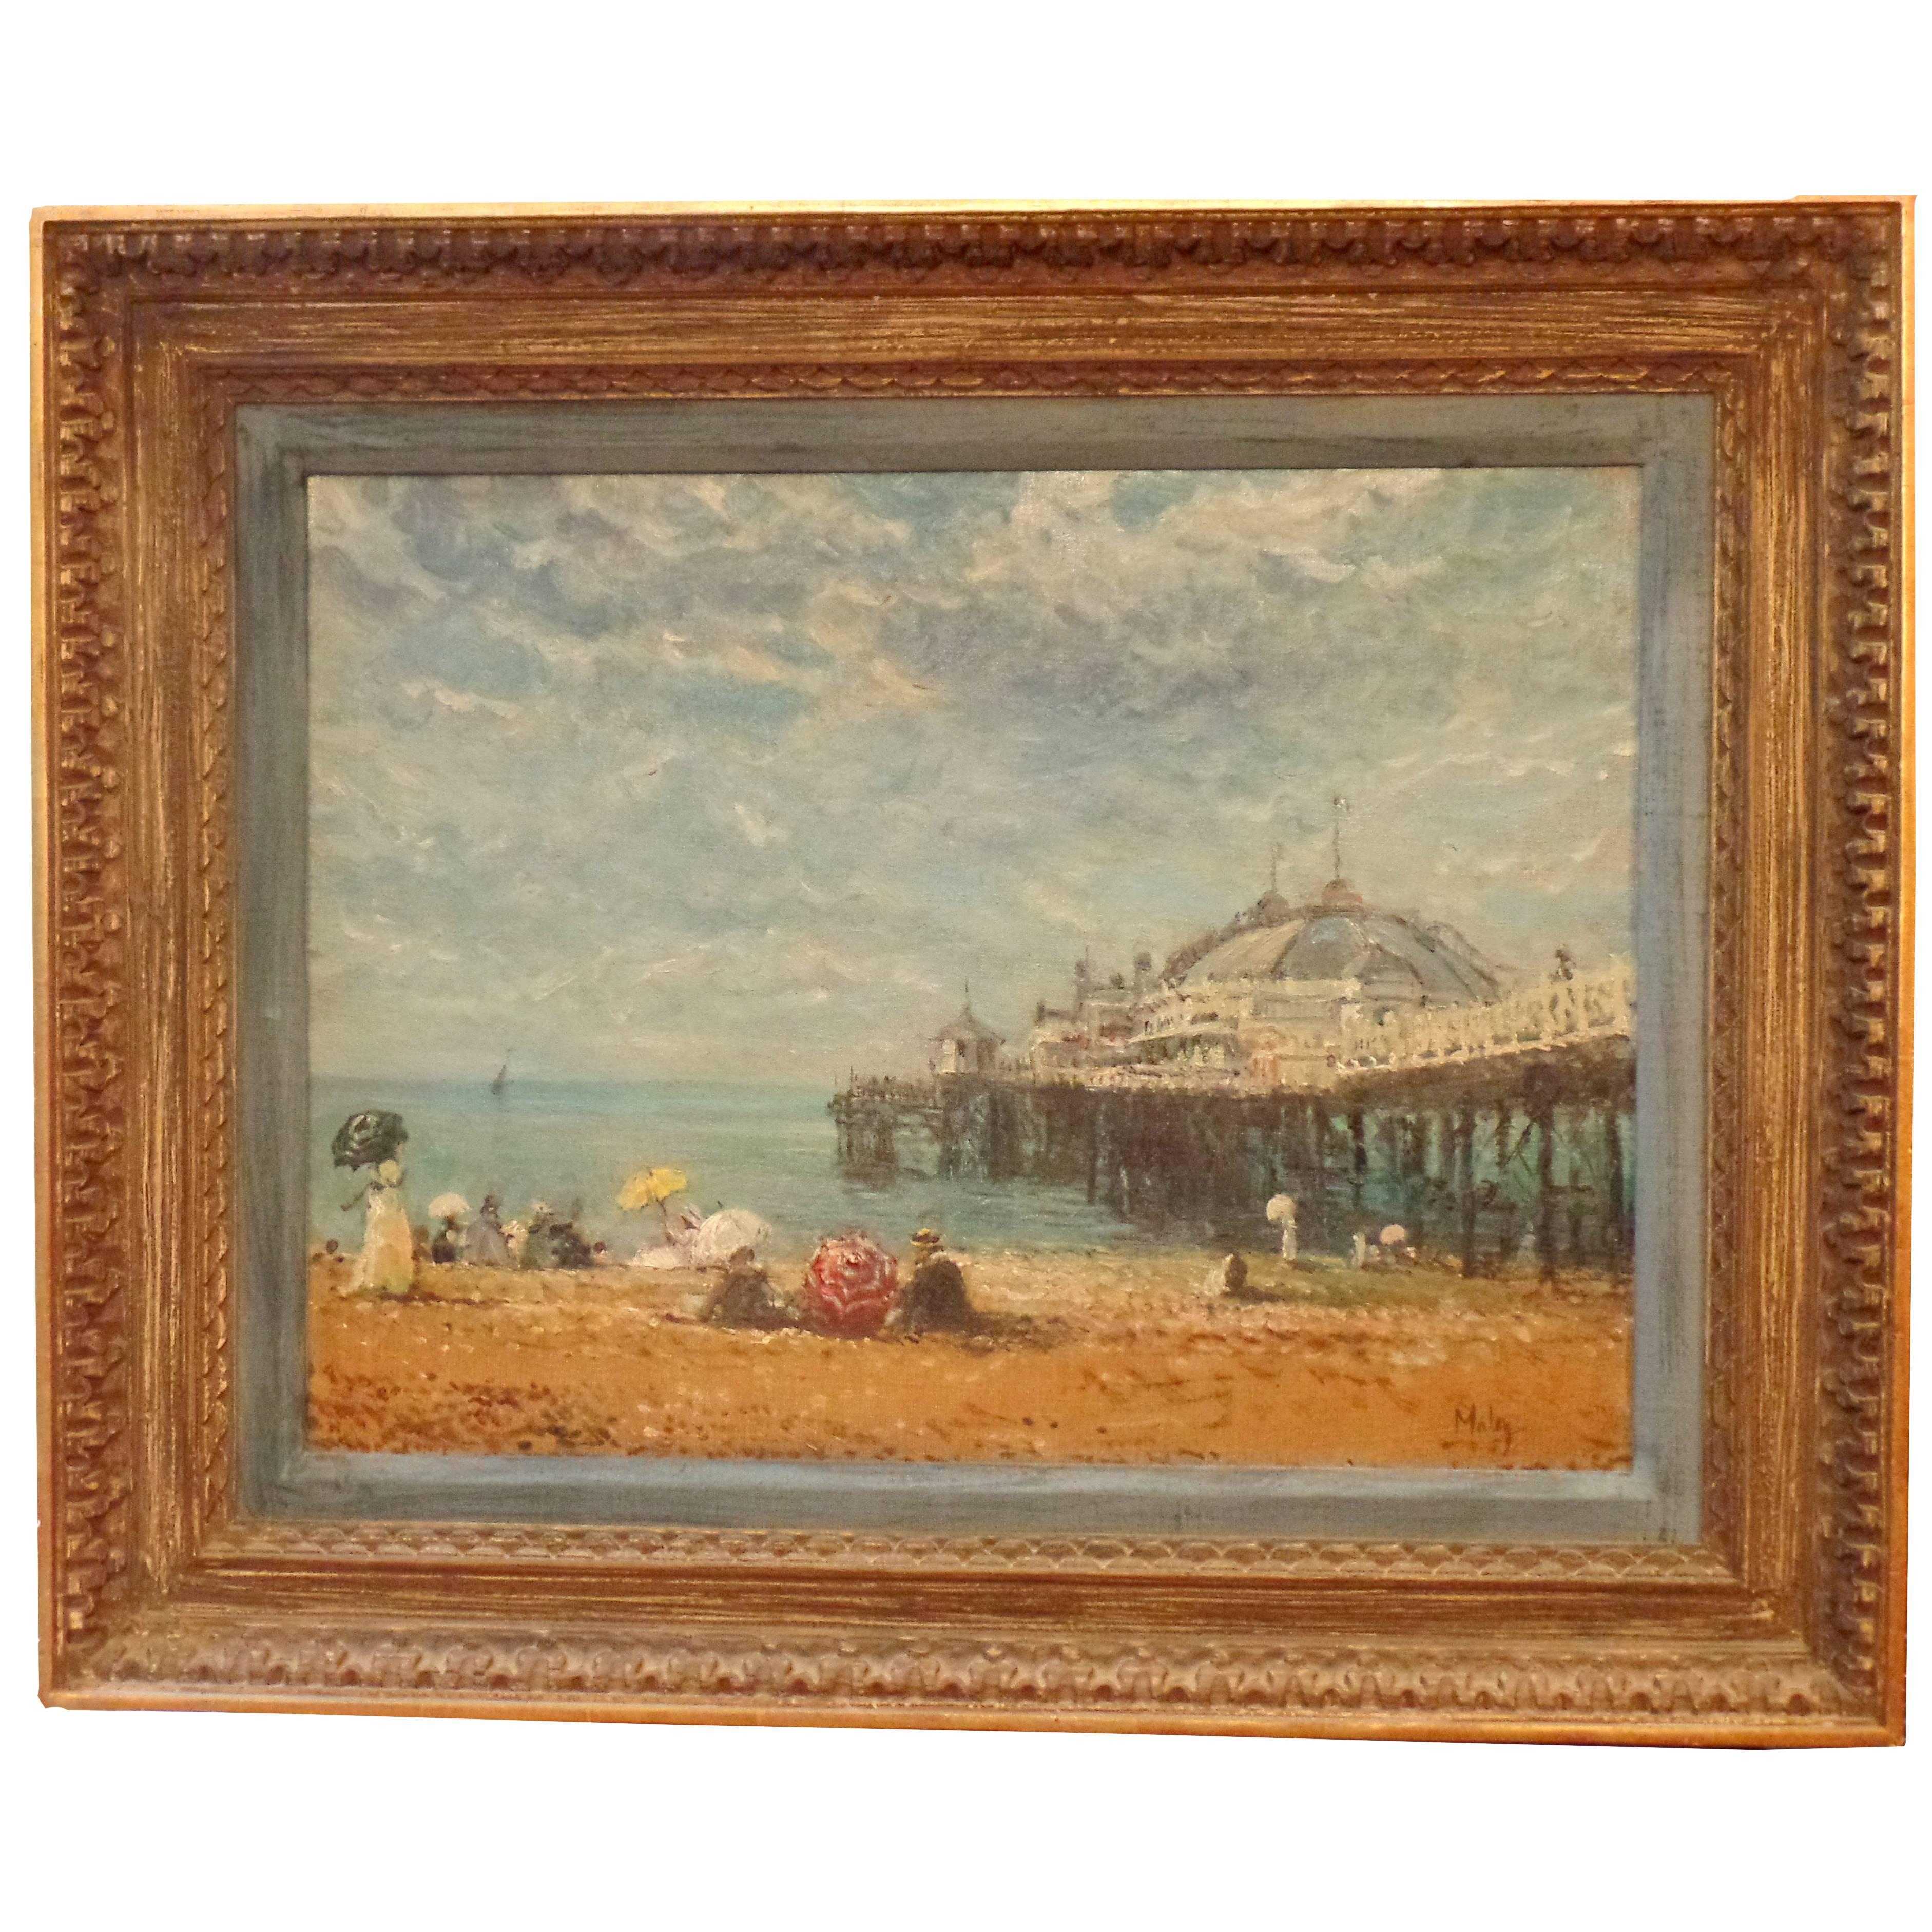 20th Century Oil Painting "The Brghton Pier", Signed Maley For Sale